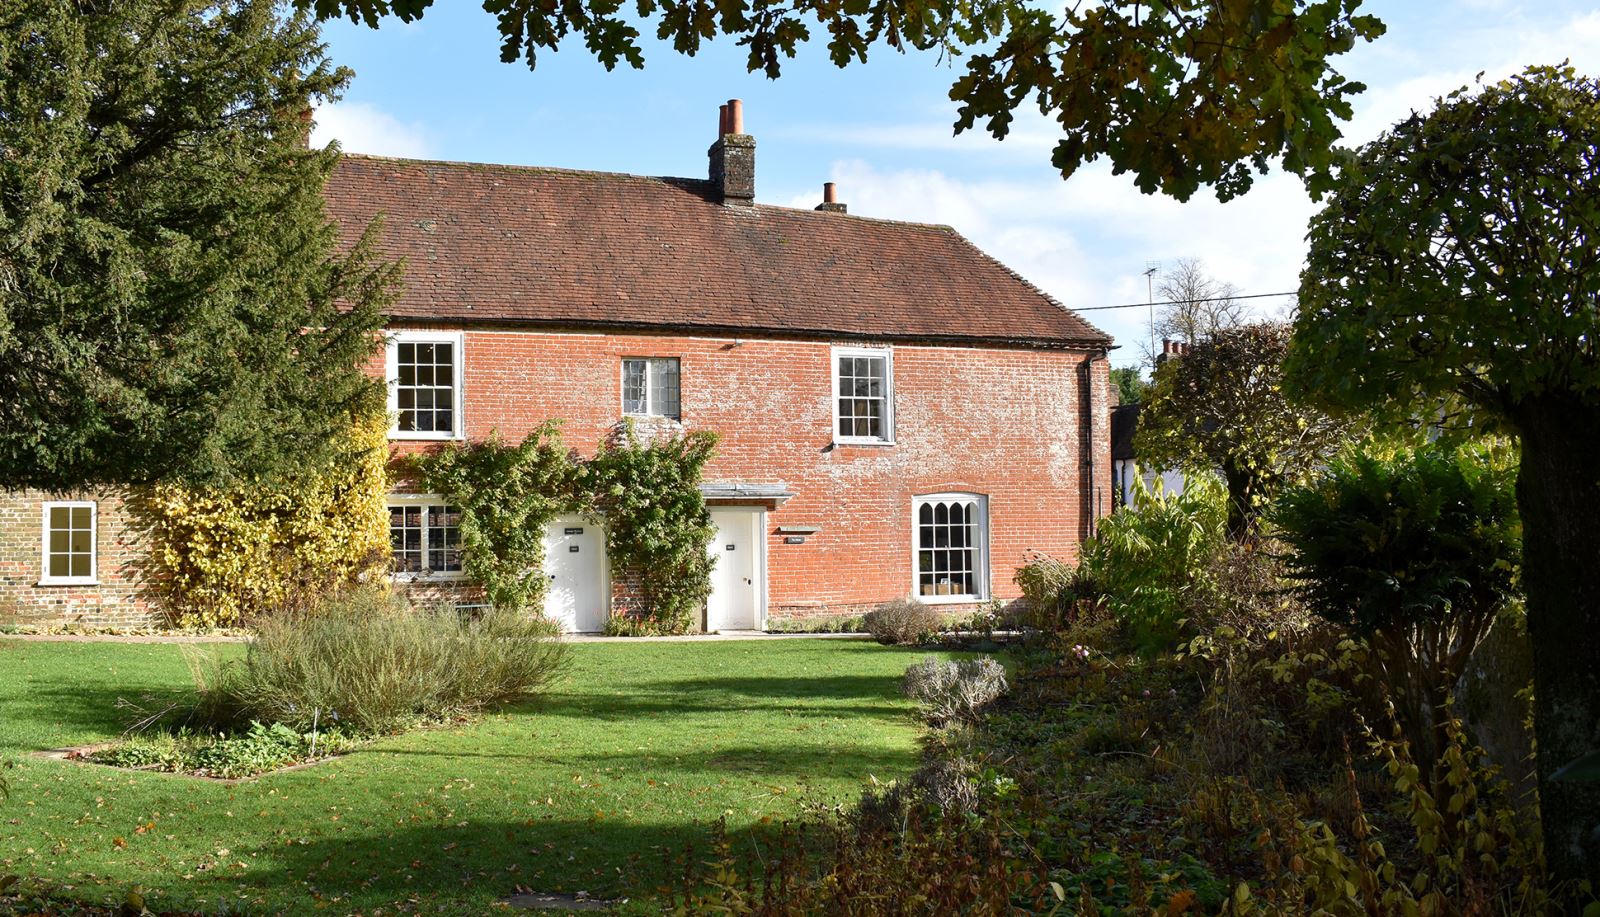 Jane Austen's House in the Village of Chawton, Hampshire